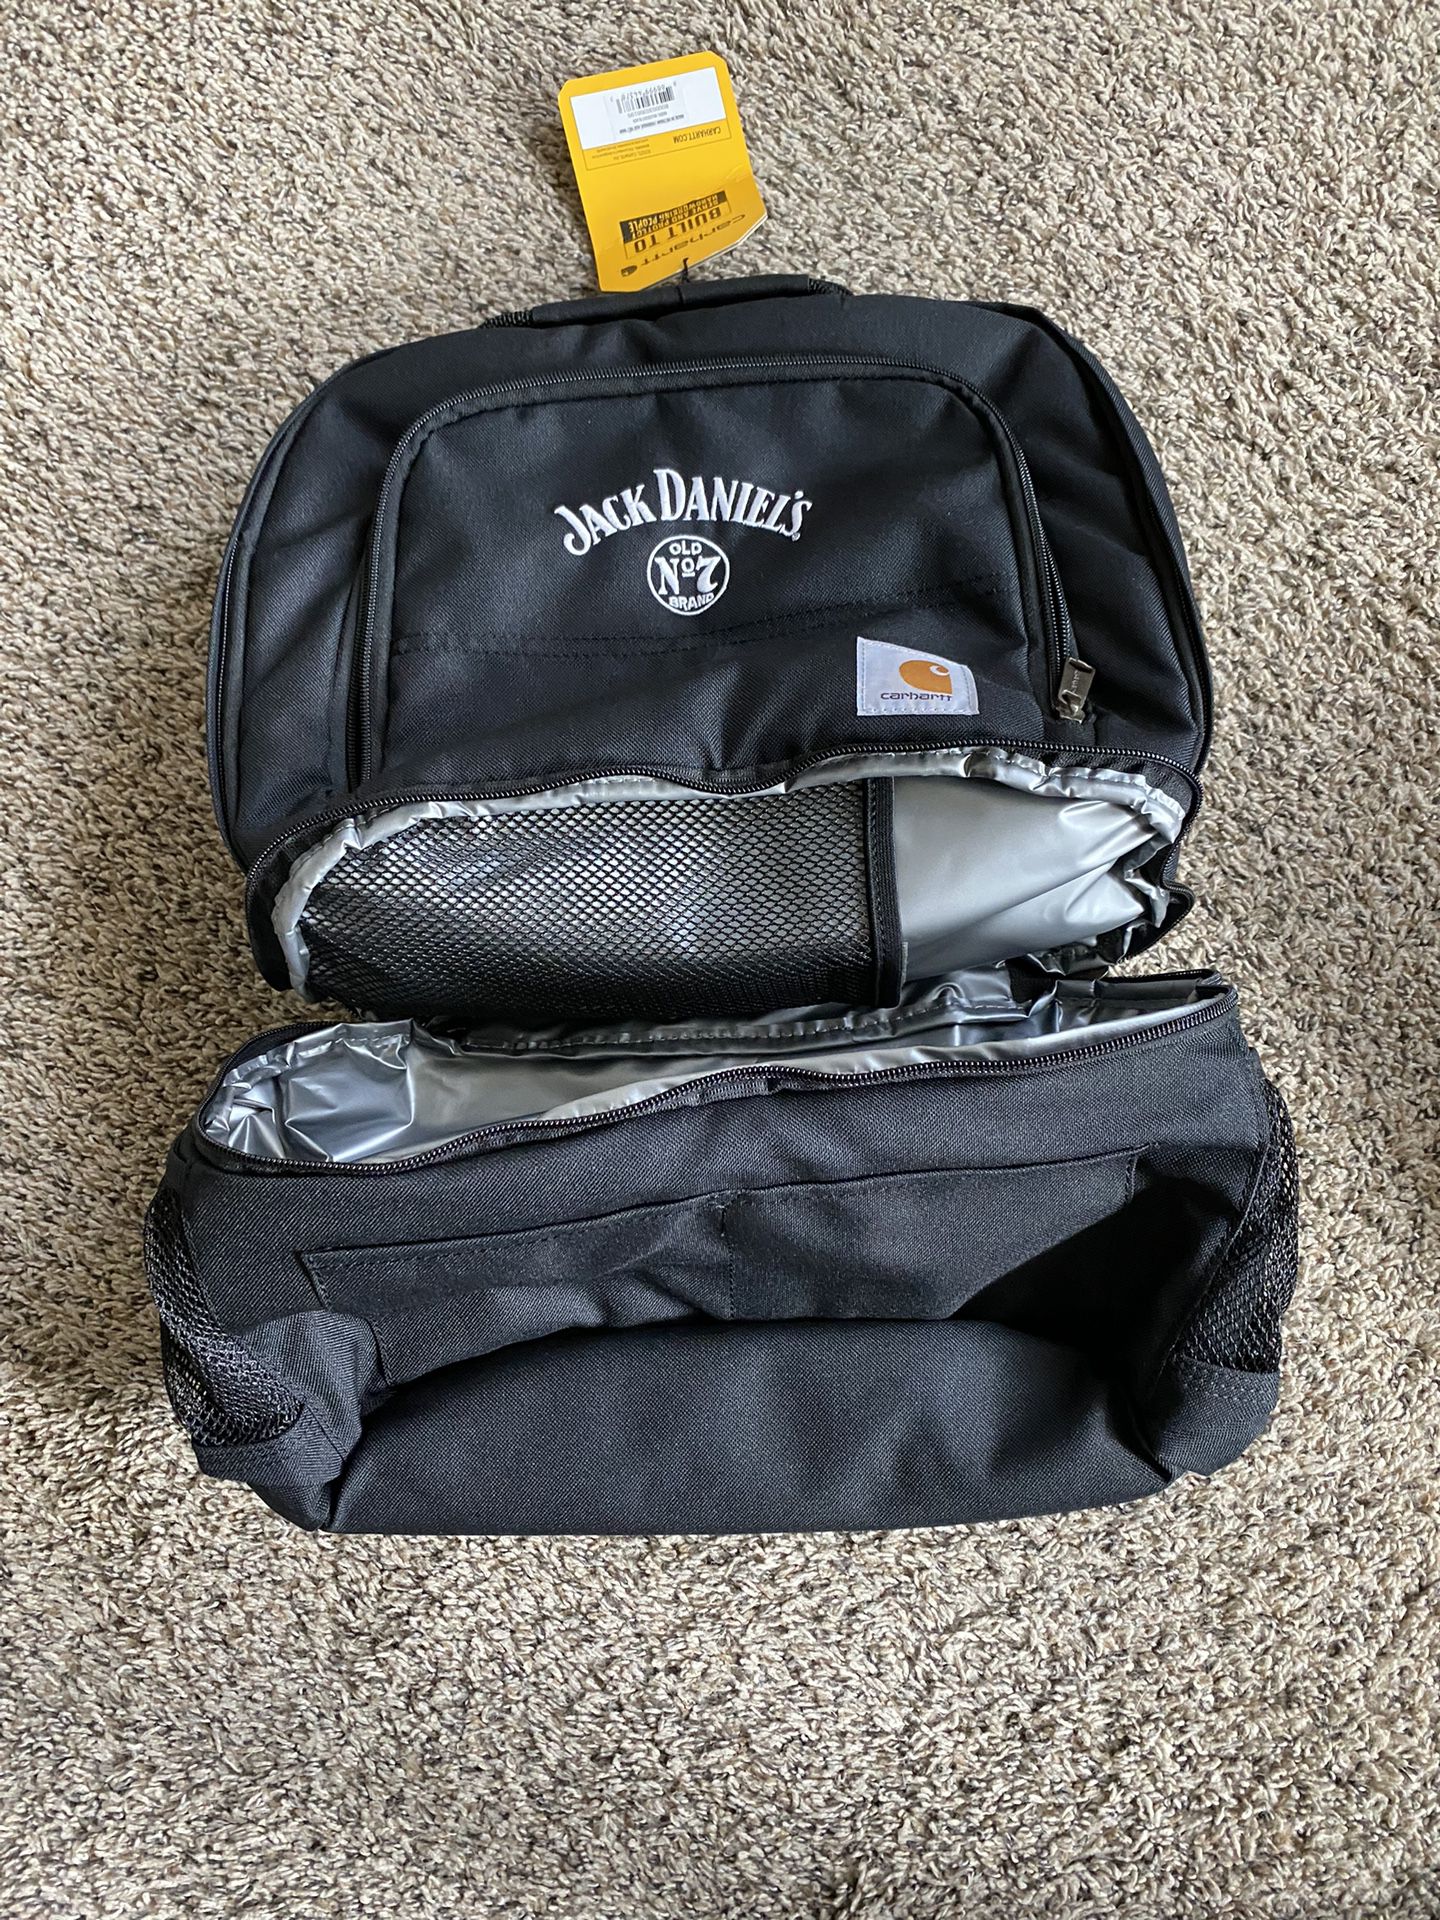 Jack Daniels Carhart Backpack (with Cooler)